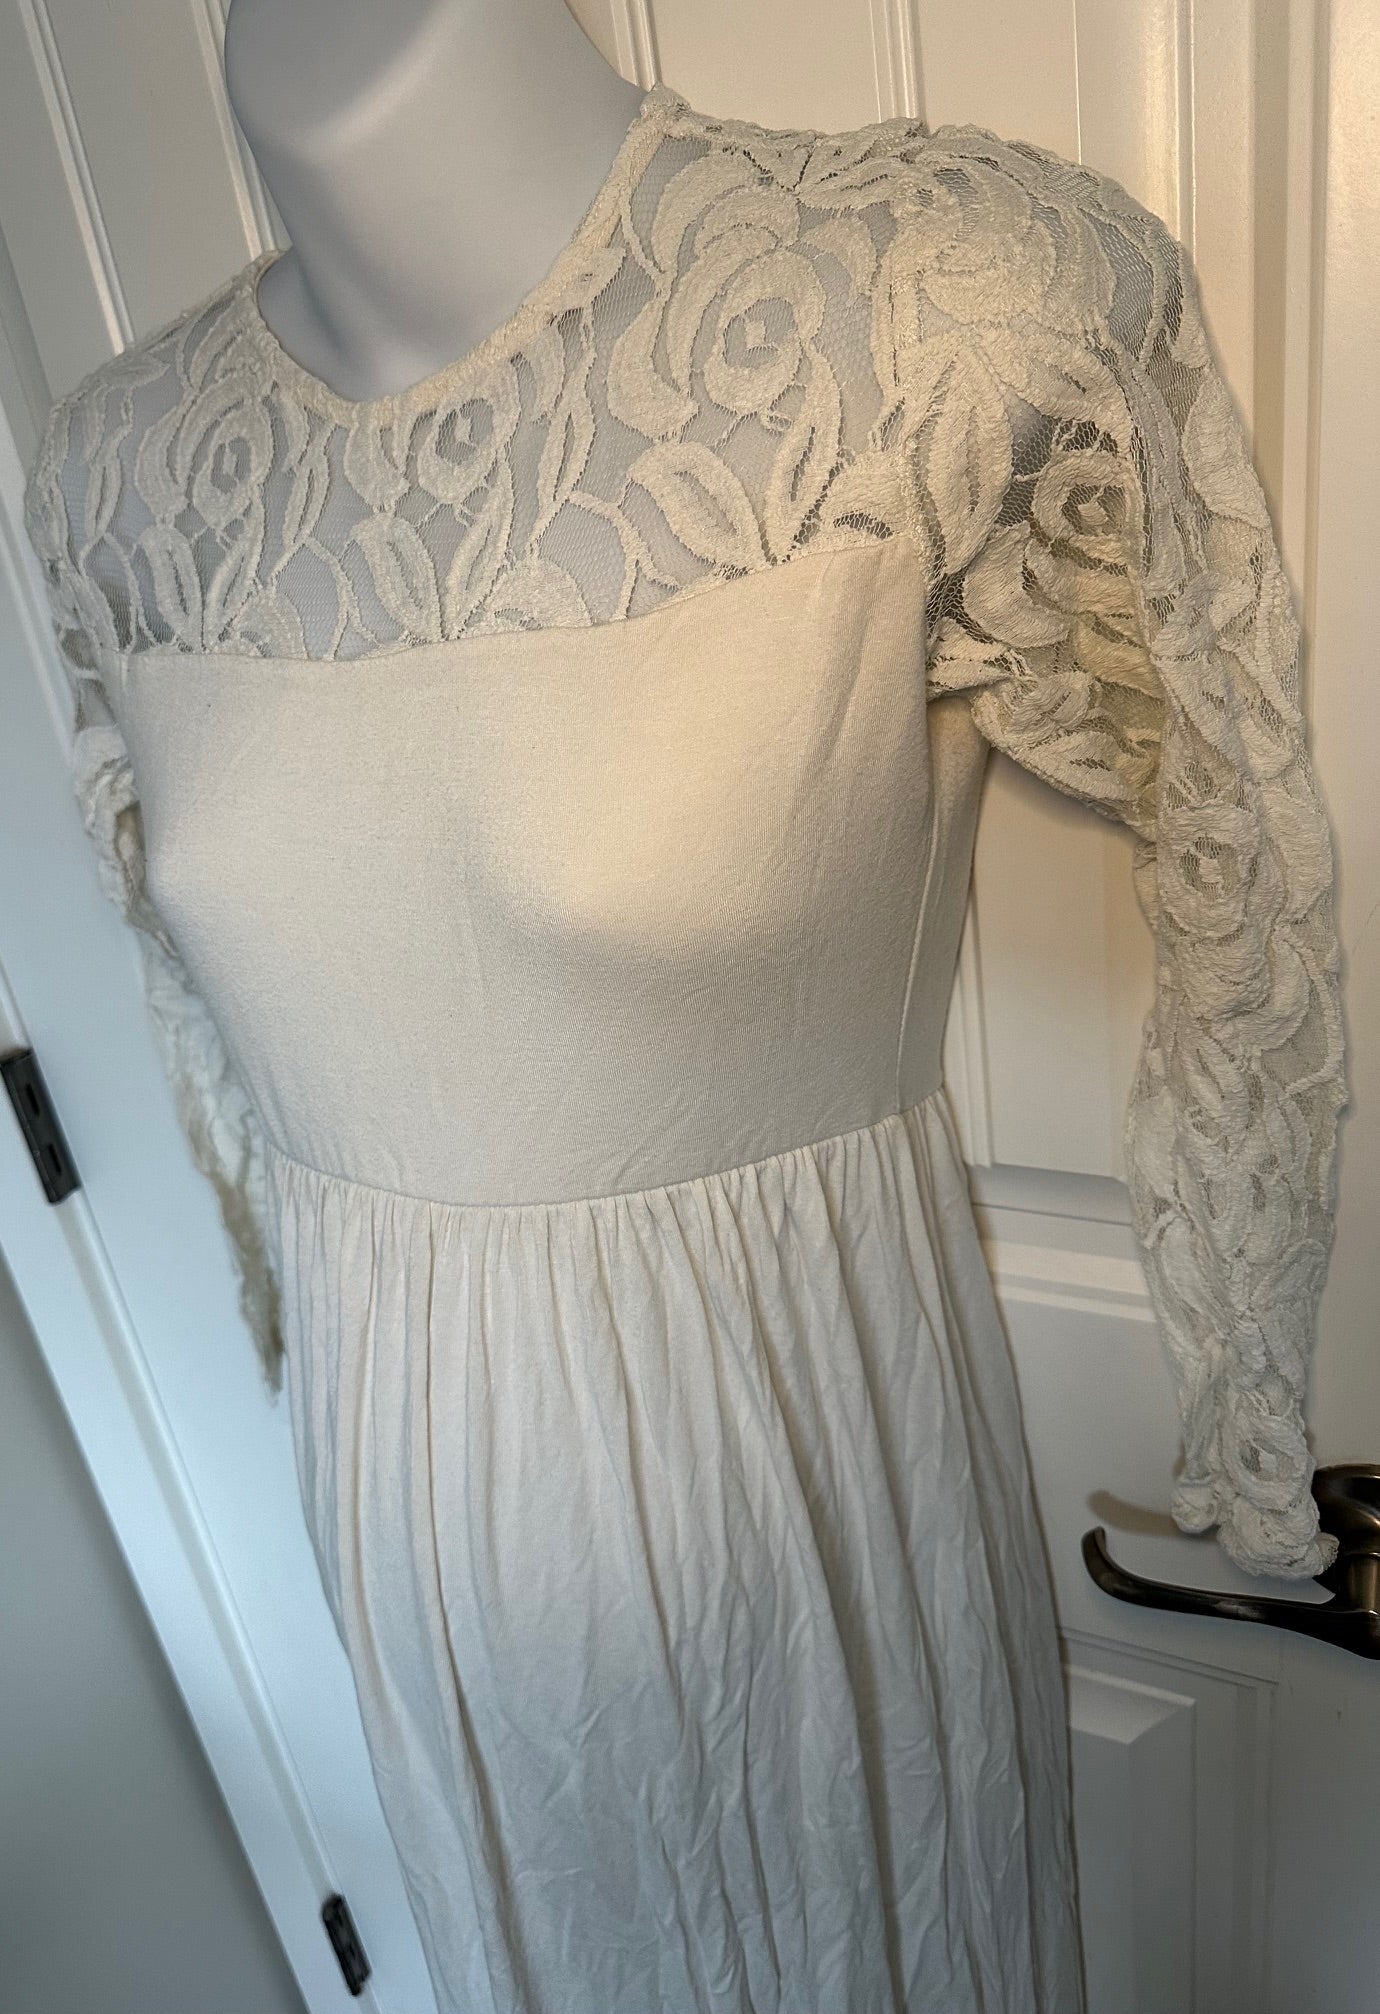 Pink Blush, Ivory Long Maternity Dress with Lace Top and Sleeves - Size Small